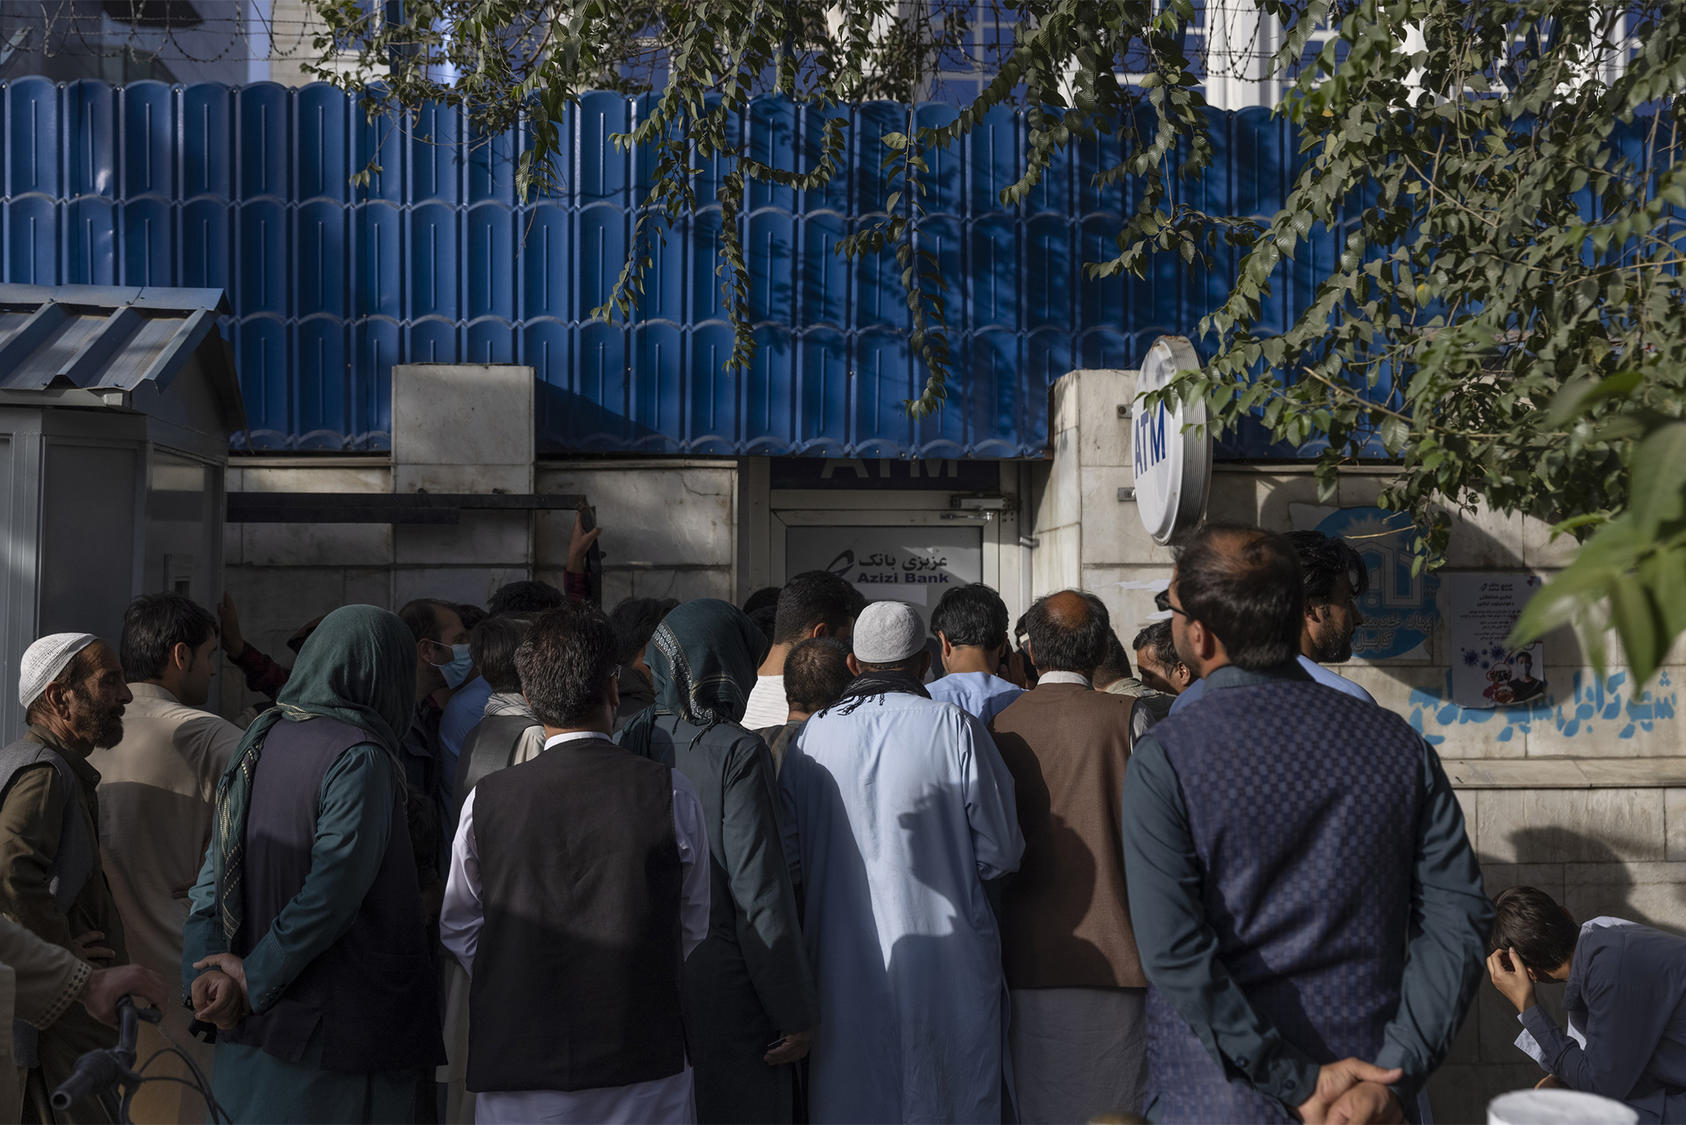 People wait in line to use an ATM machine at an Azizi Bank branch in Kabul, Afghanistan on Wednesday, Aug. 25, 2021. (Victor J. Blue/The New York Times)